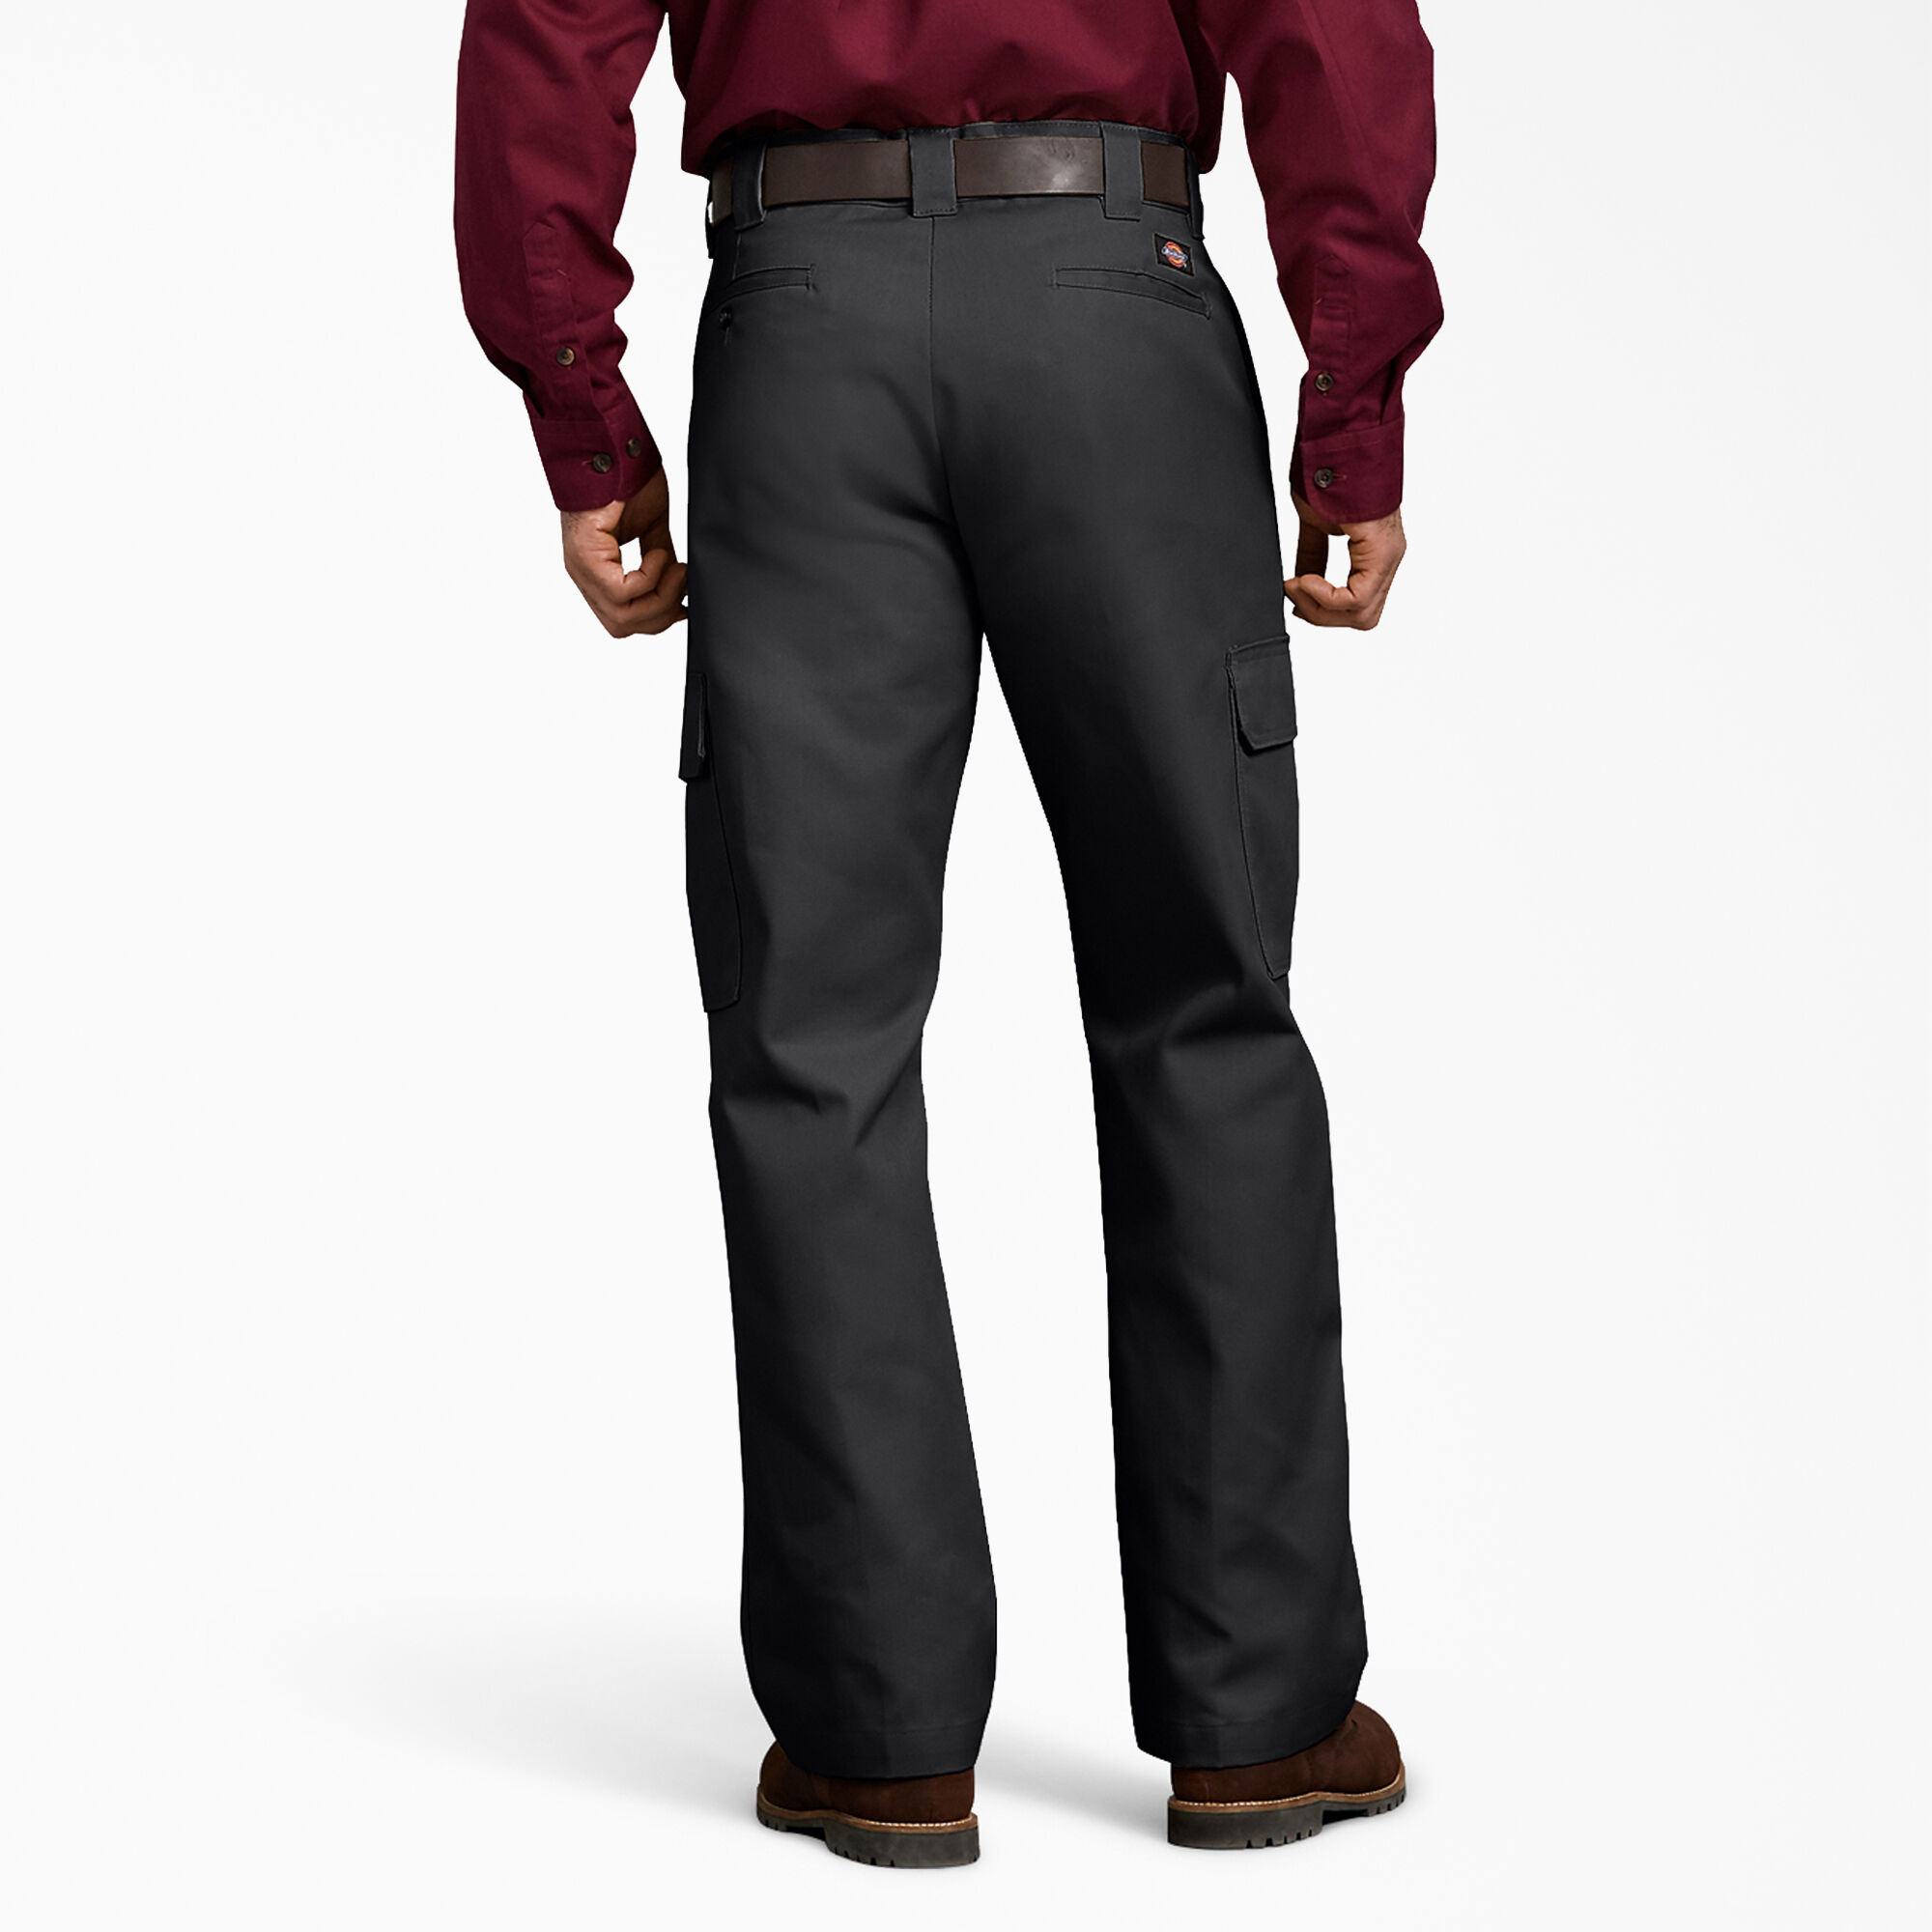 When in Doubt, Choose Cargo Work Pants for Your Construction Job - IronPros